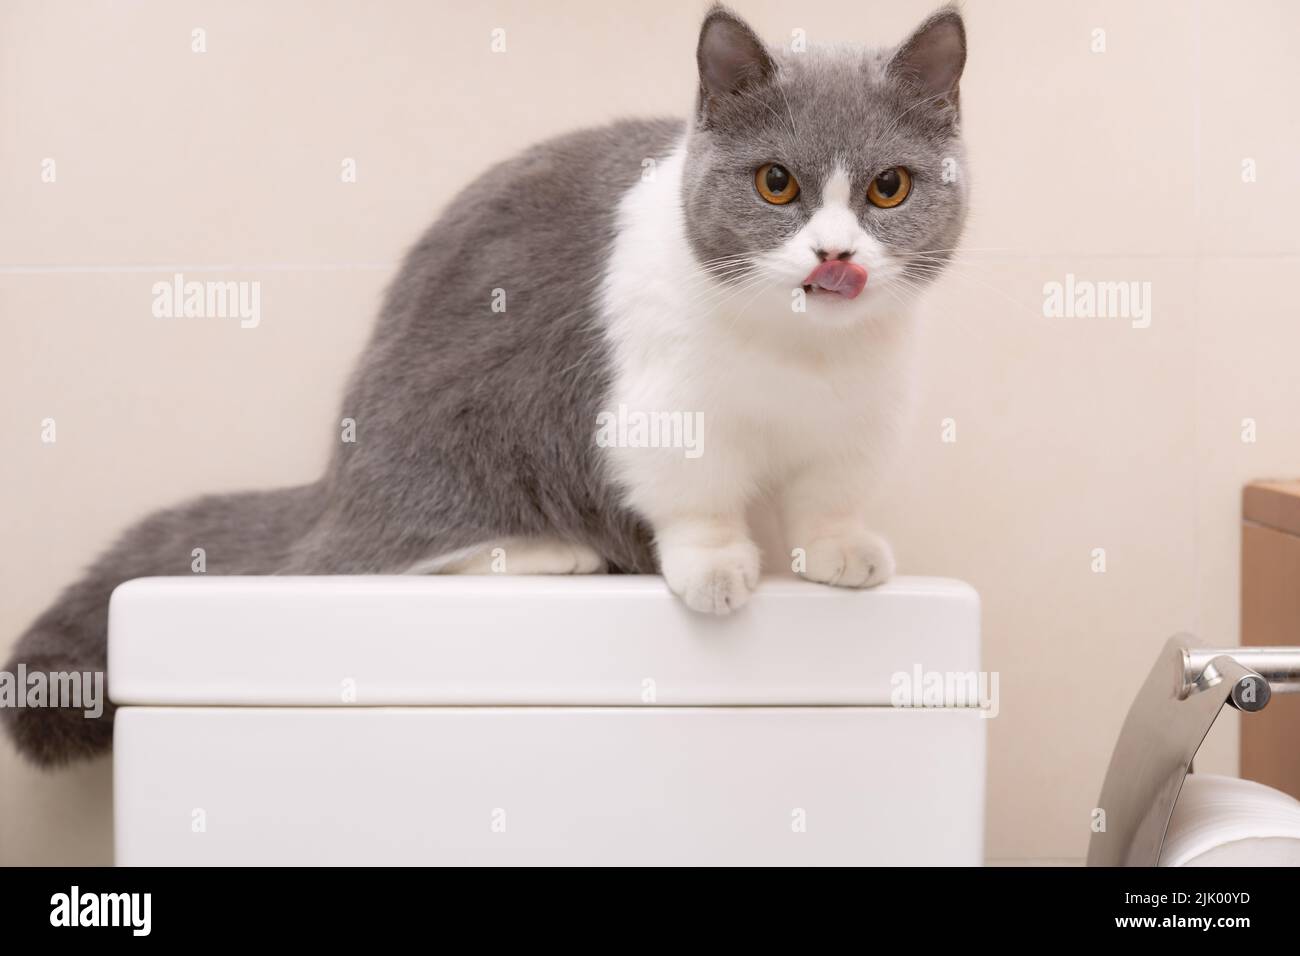 a cute british shorthair cat sitting on top of a water tank of a commode Stock Photo